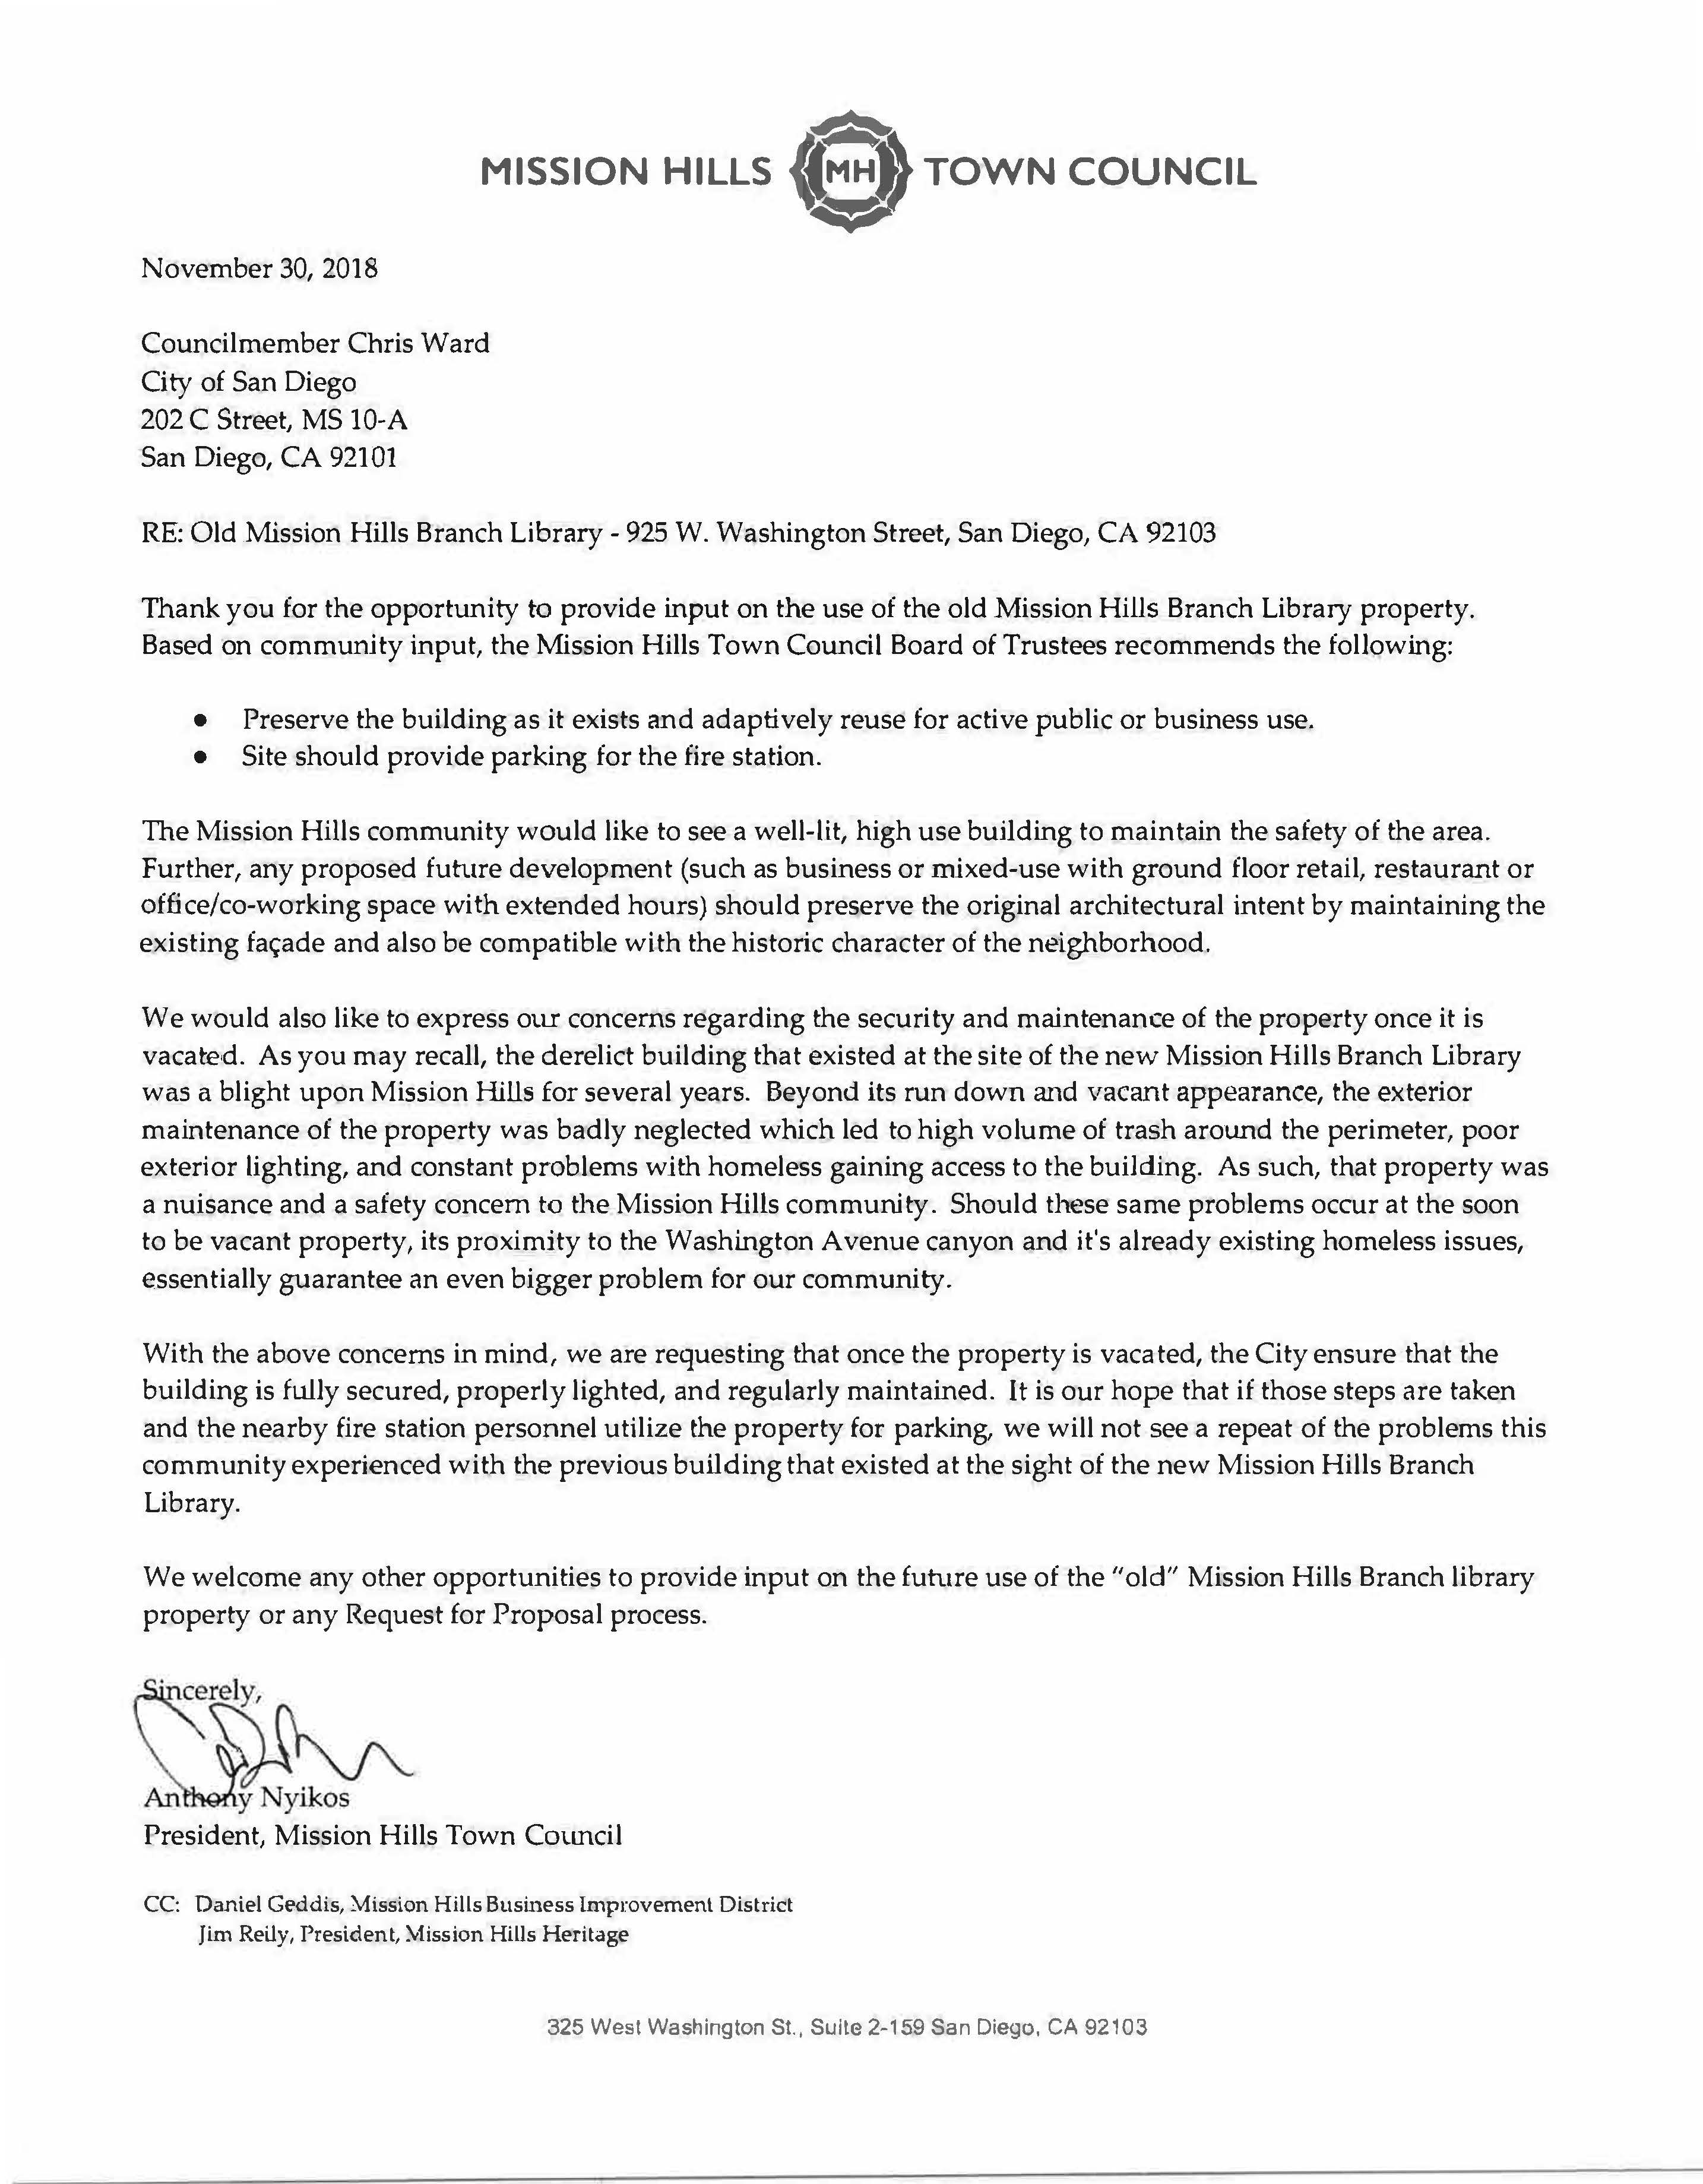 MHTC - Letter to Chris Ward Regarding Old Mission Hills Library